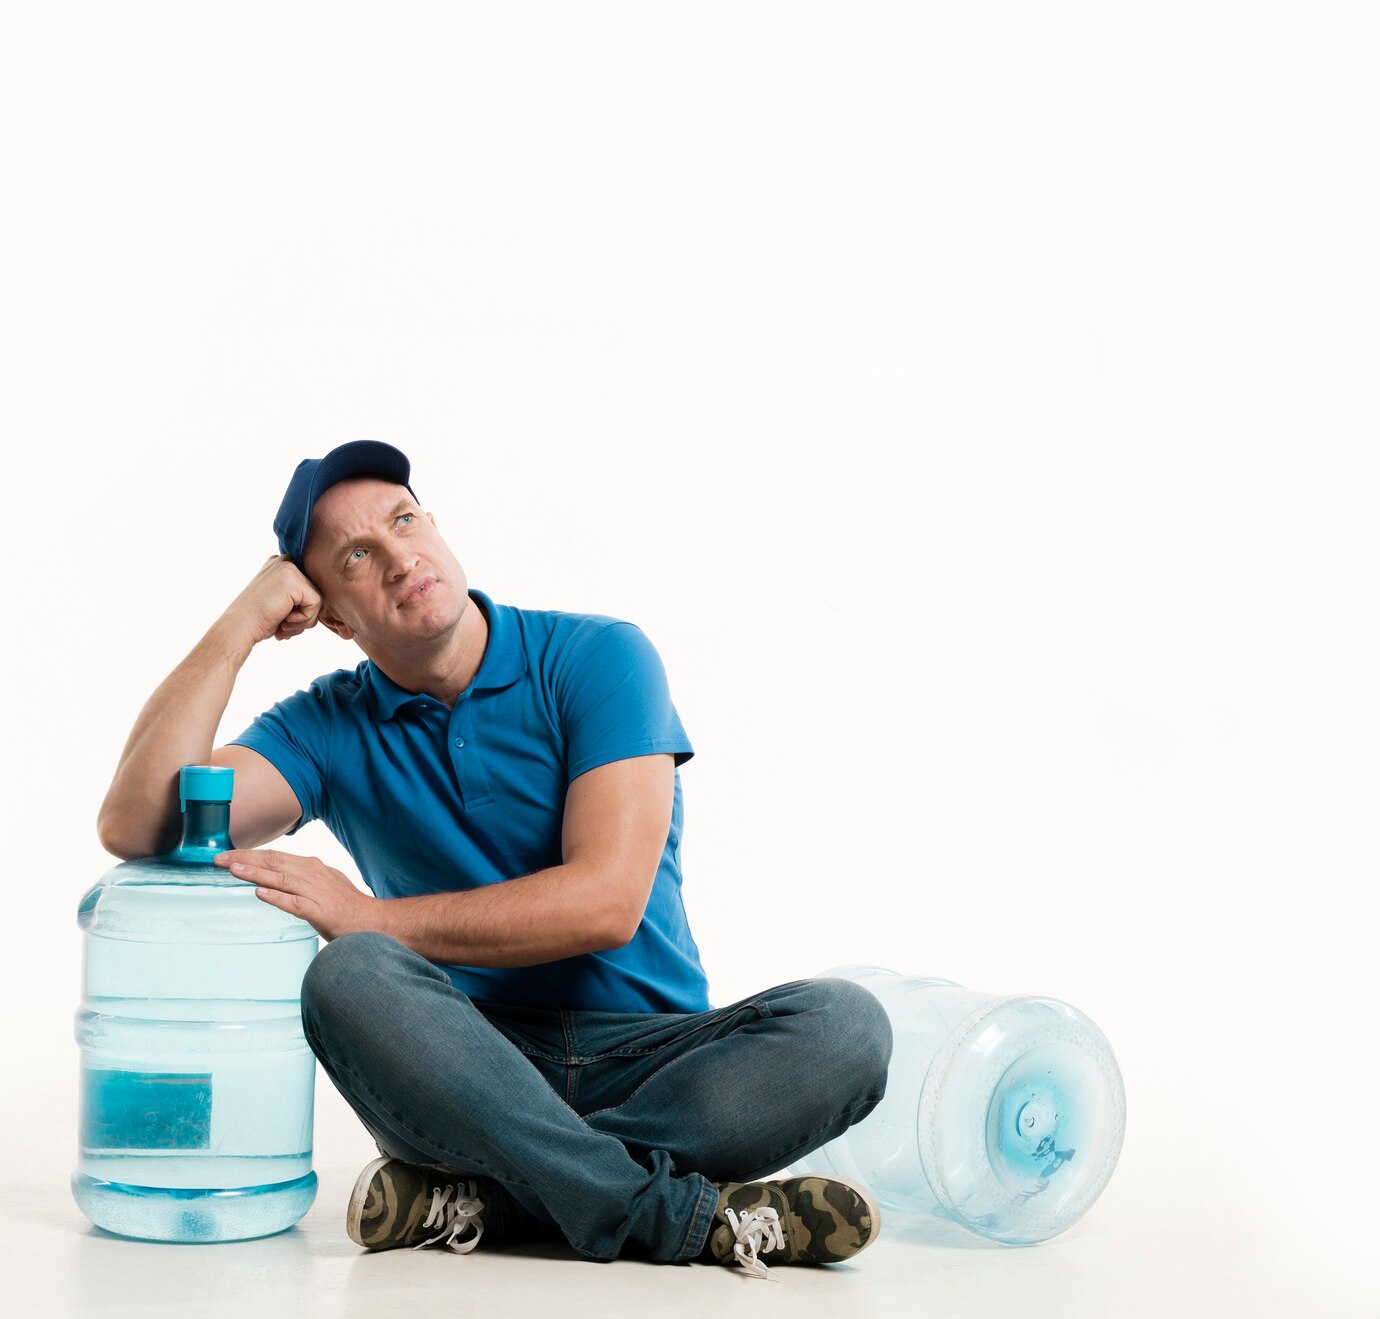 front-view-of-delivery-man-posing-with-water-bottle_23-2148382513.jpg